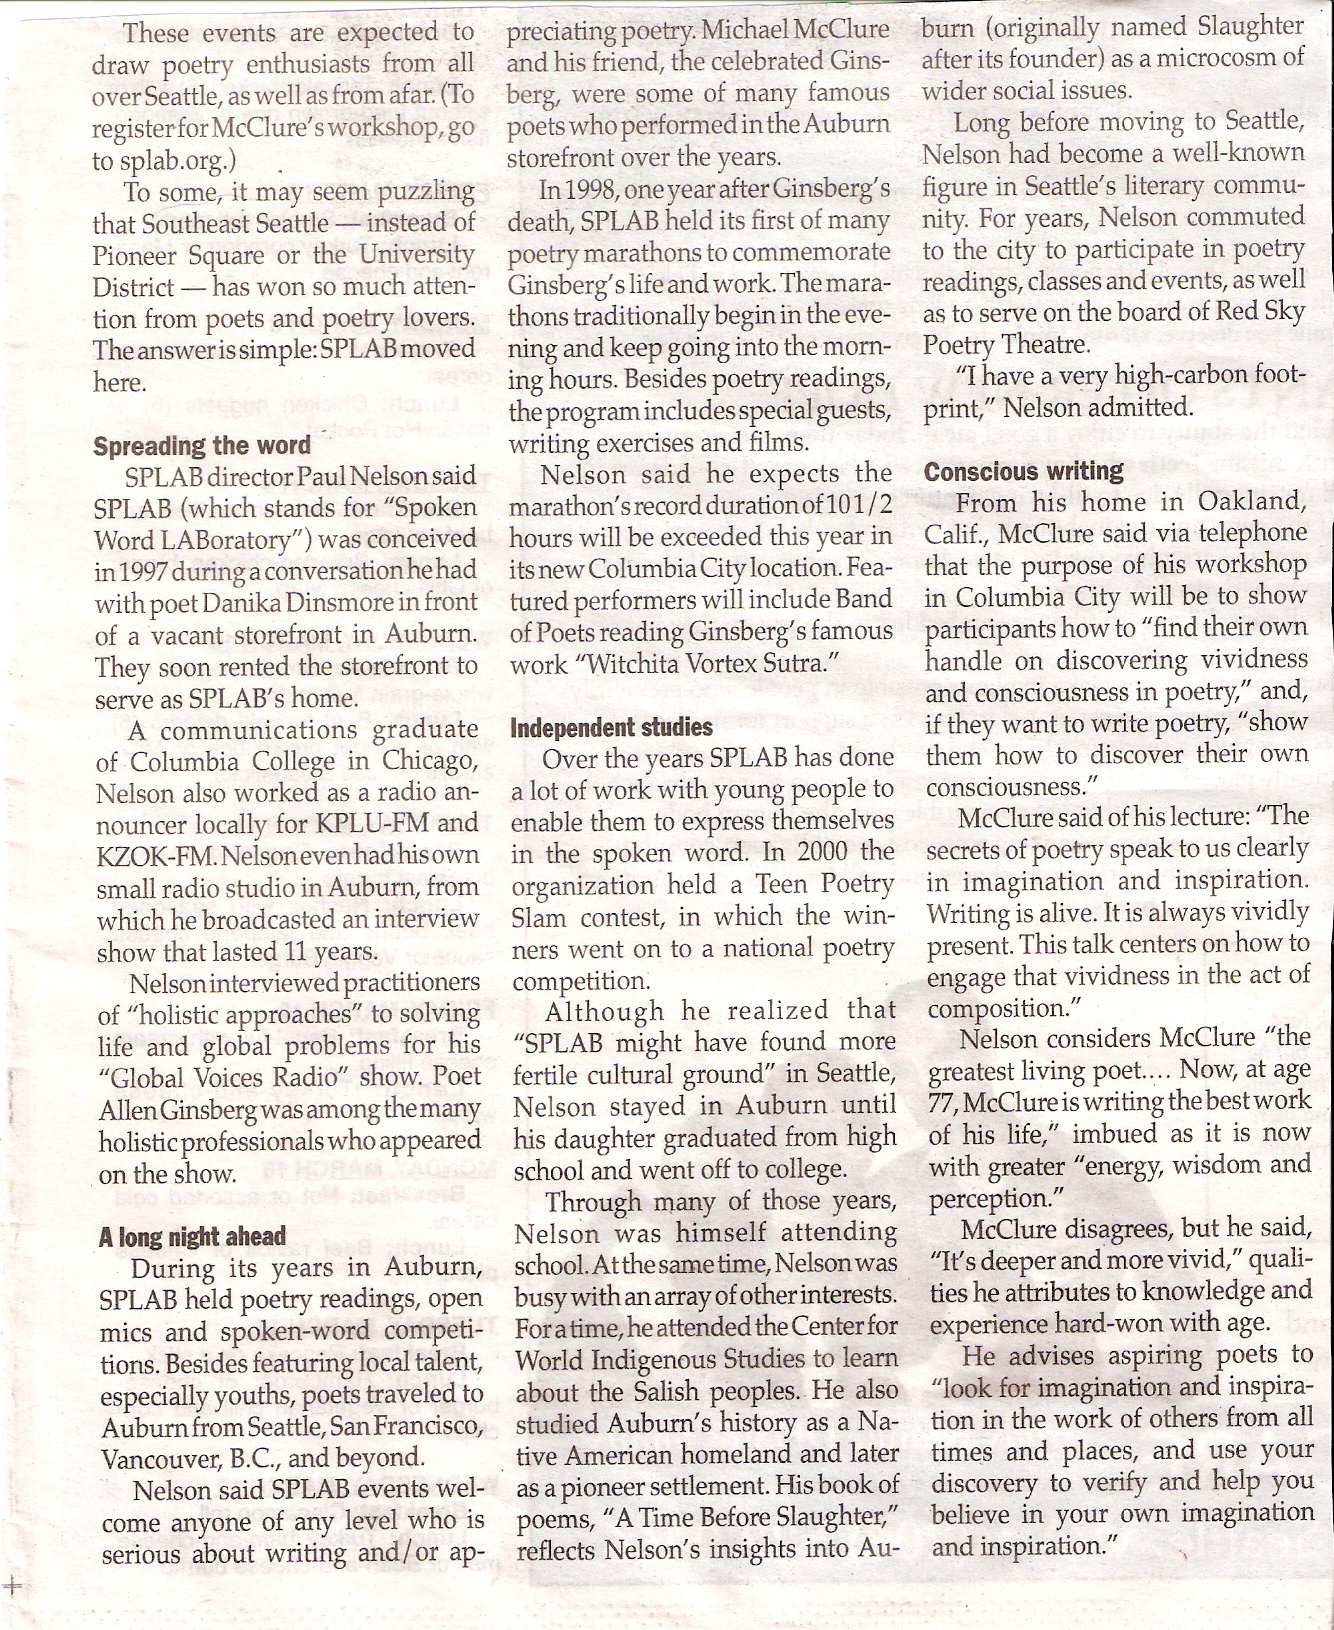 McClure news article continued, March 3, 2010 South Seattle Beacon